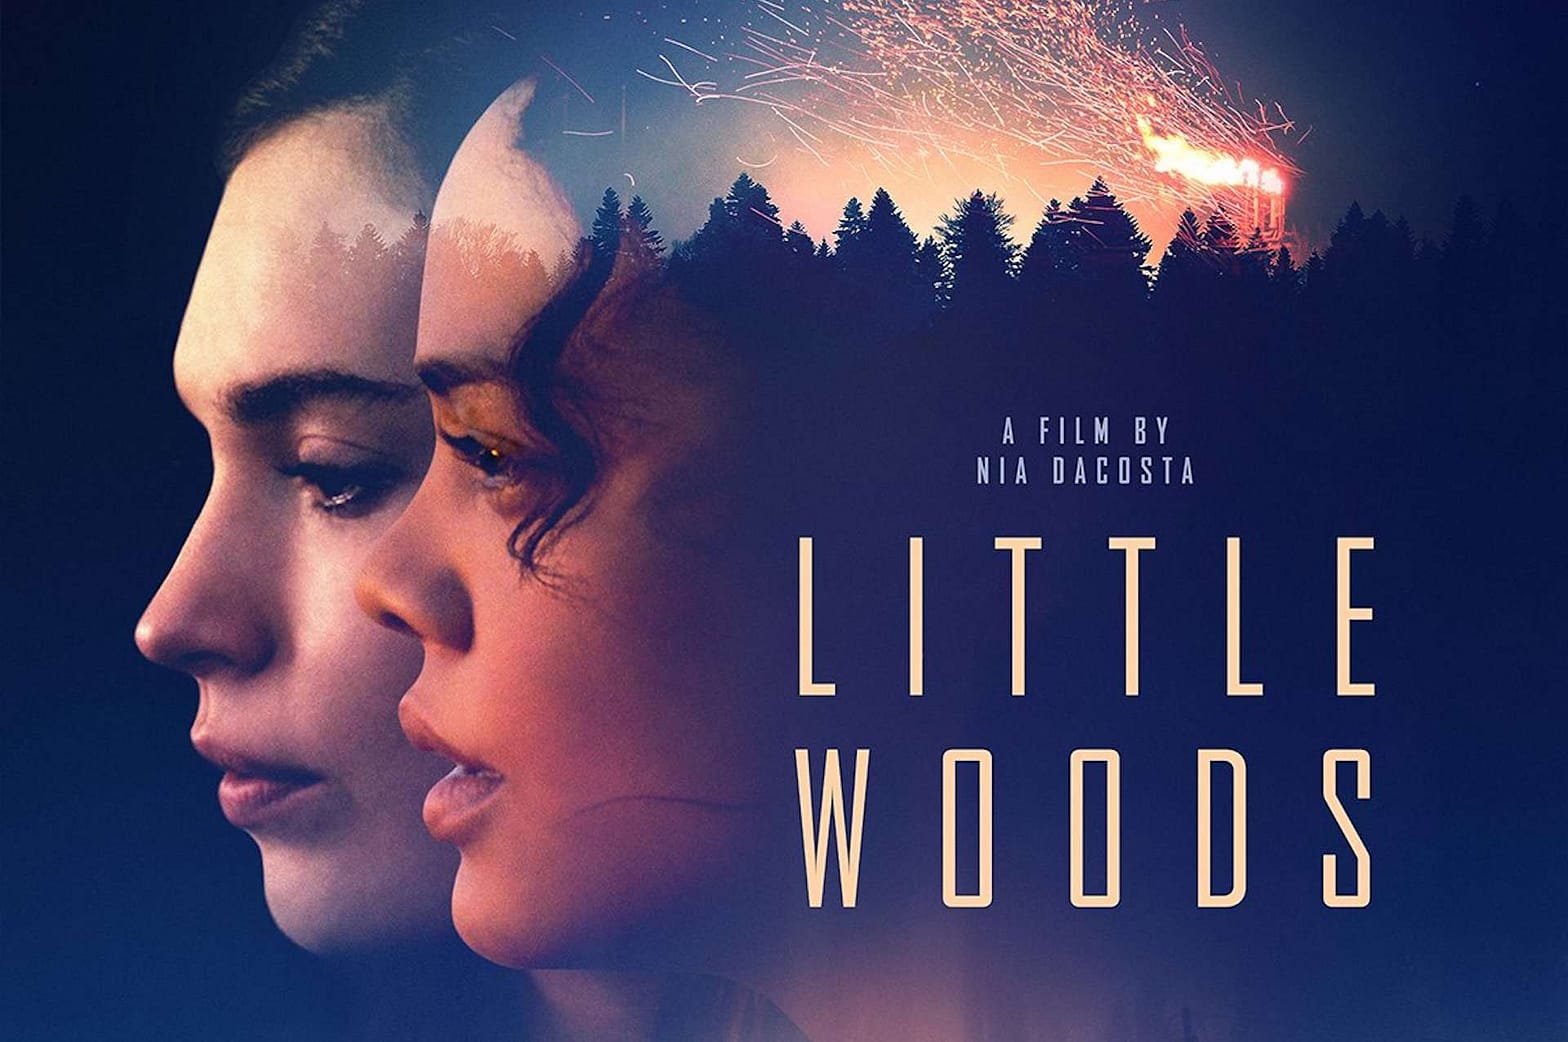 "Little Woods" Explores Family Bonds, Poverty, and Opioids in Small-Town America